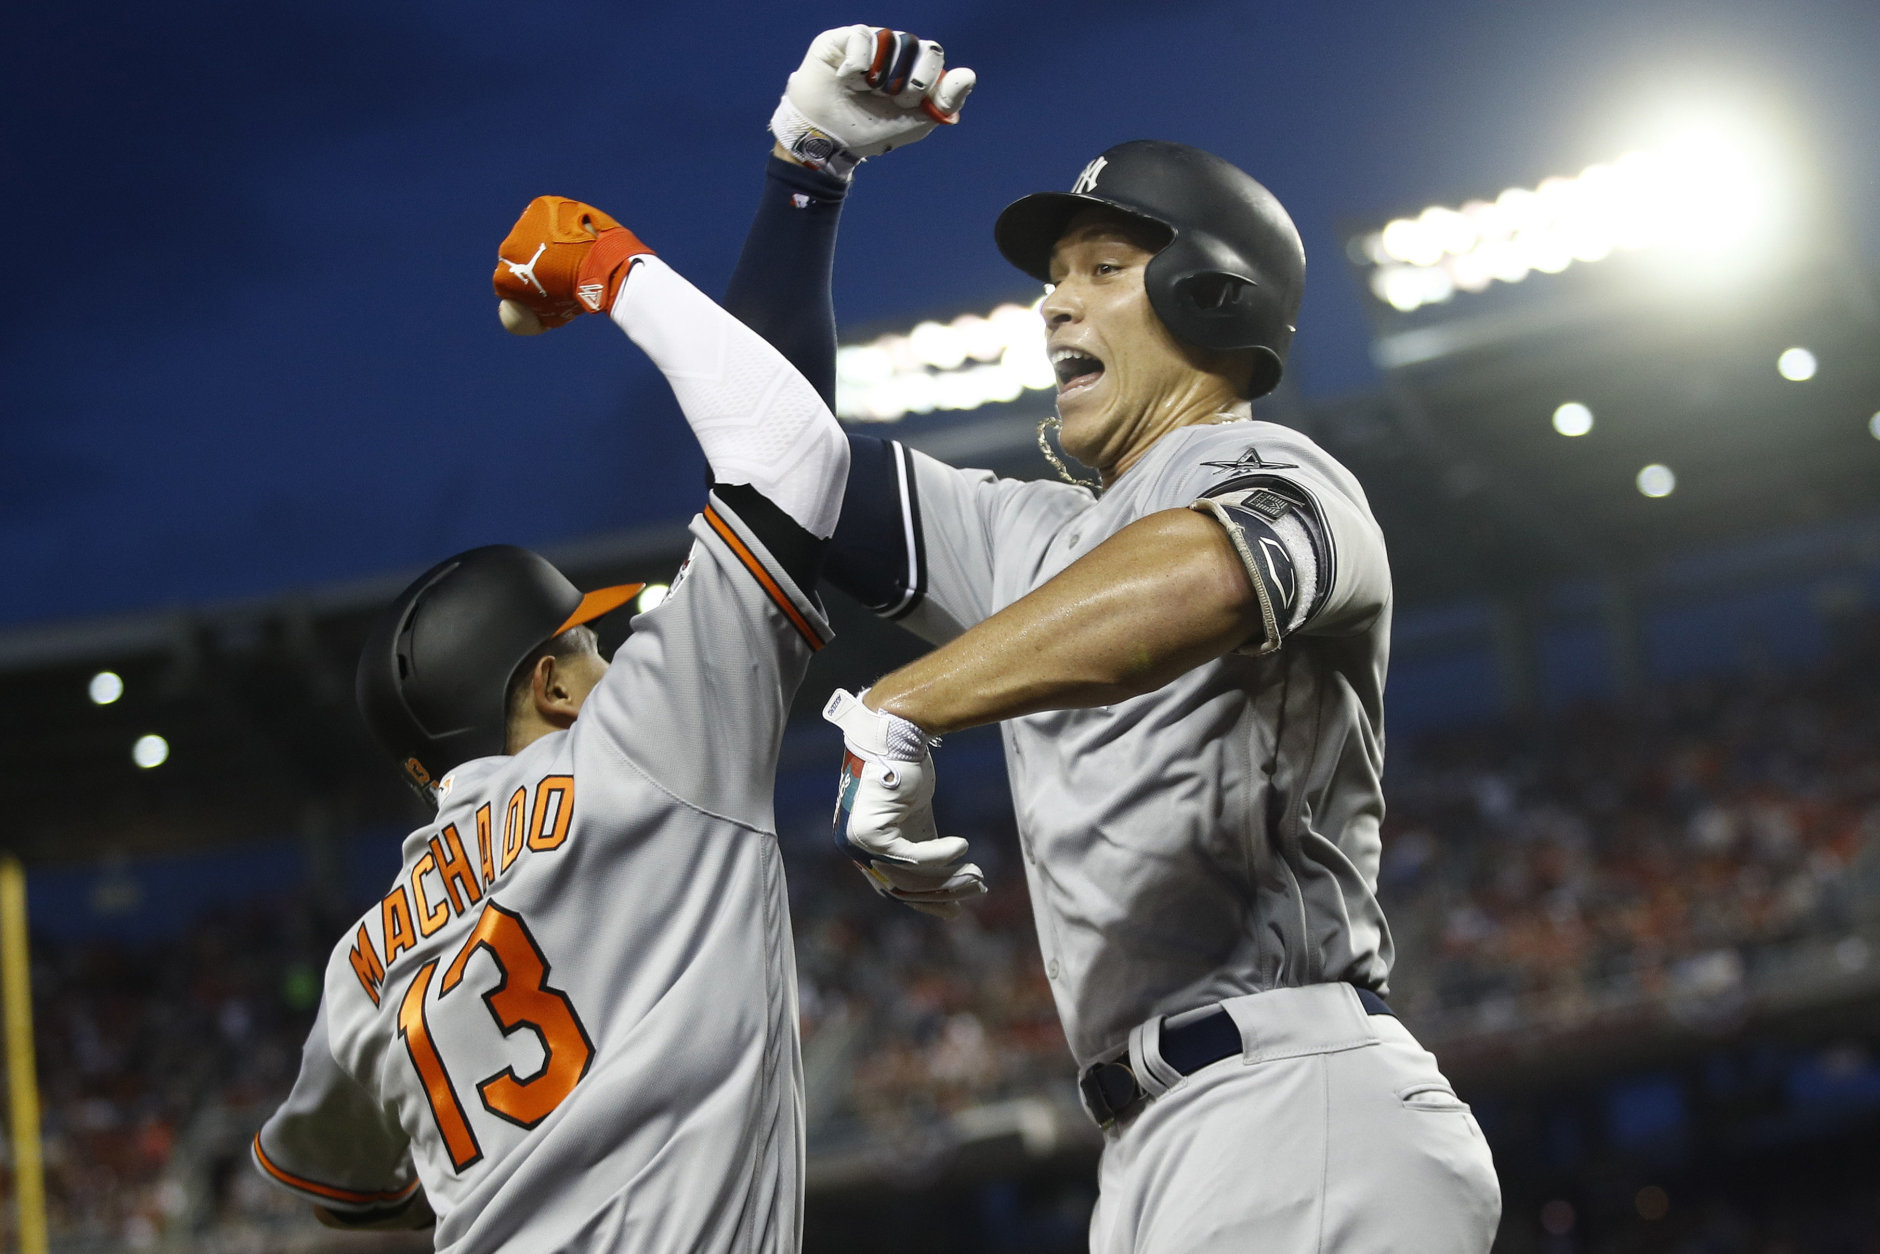 New York Yankees outfielder Aaron Judge (99) celebrates his solo home run with Baltimore Orioles shortstop Manny Machado (13) during the first inning Major League Baseball All-star Game, Tuesday, July 17, 2018 in Washington. (AP Photo/Patrick Semansky)